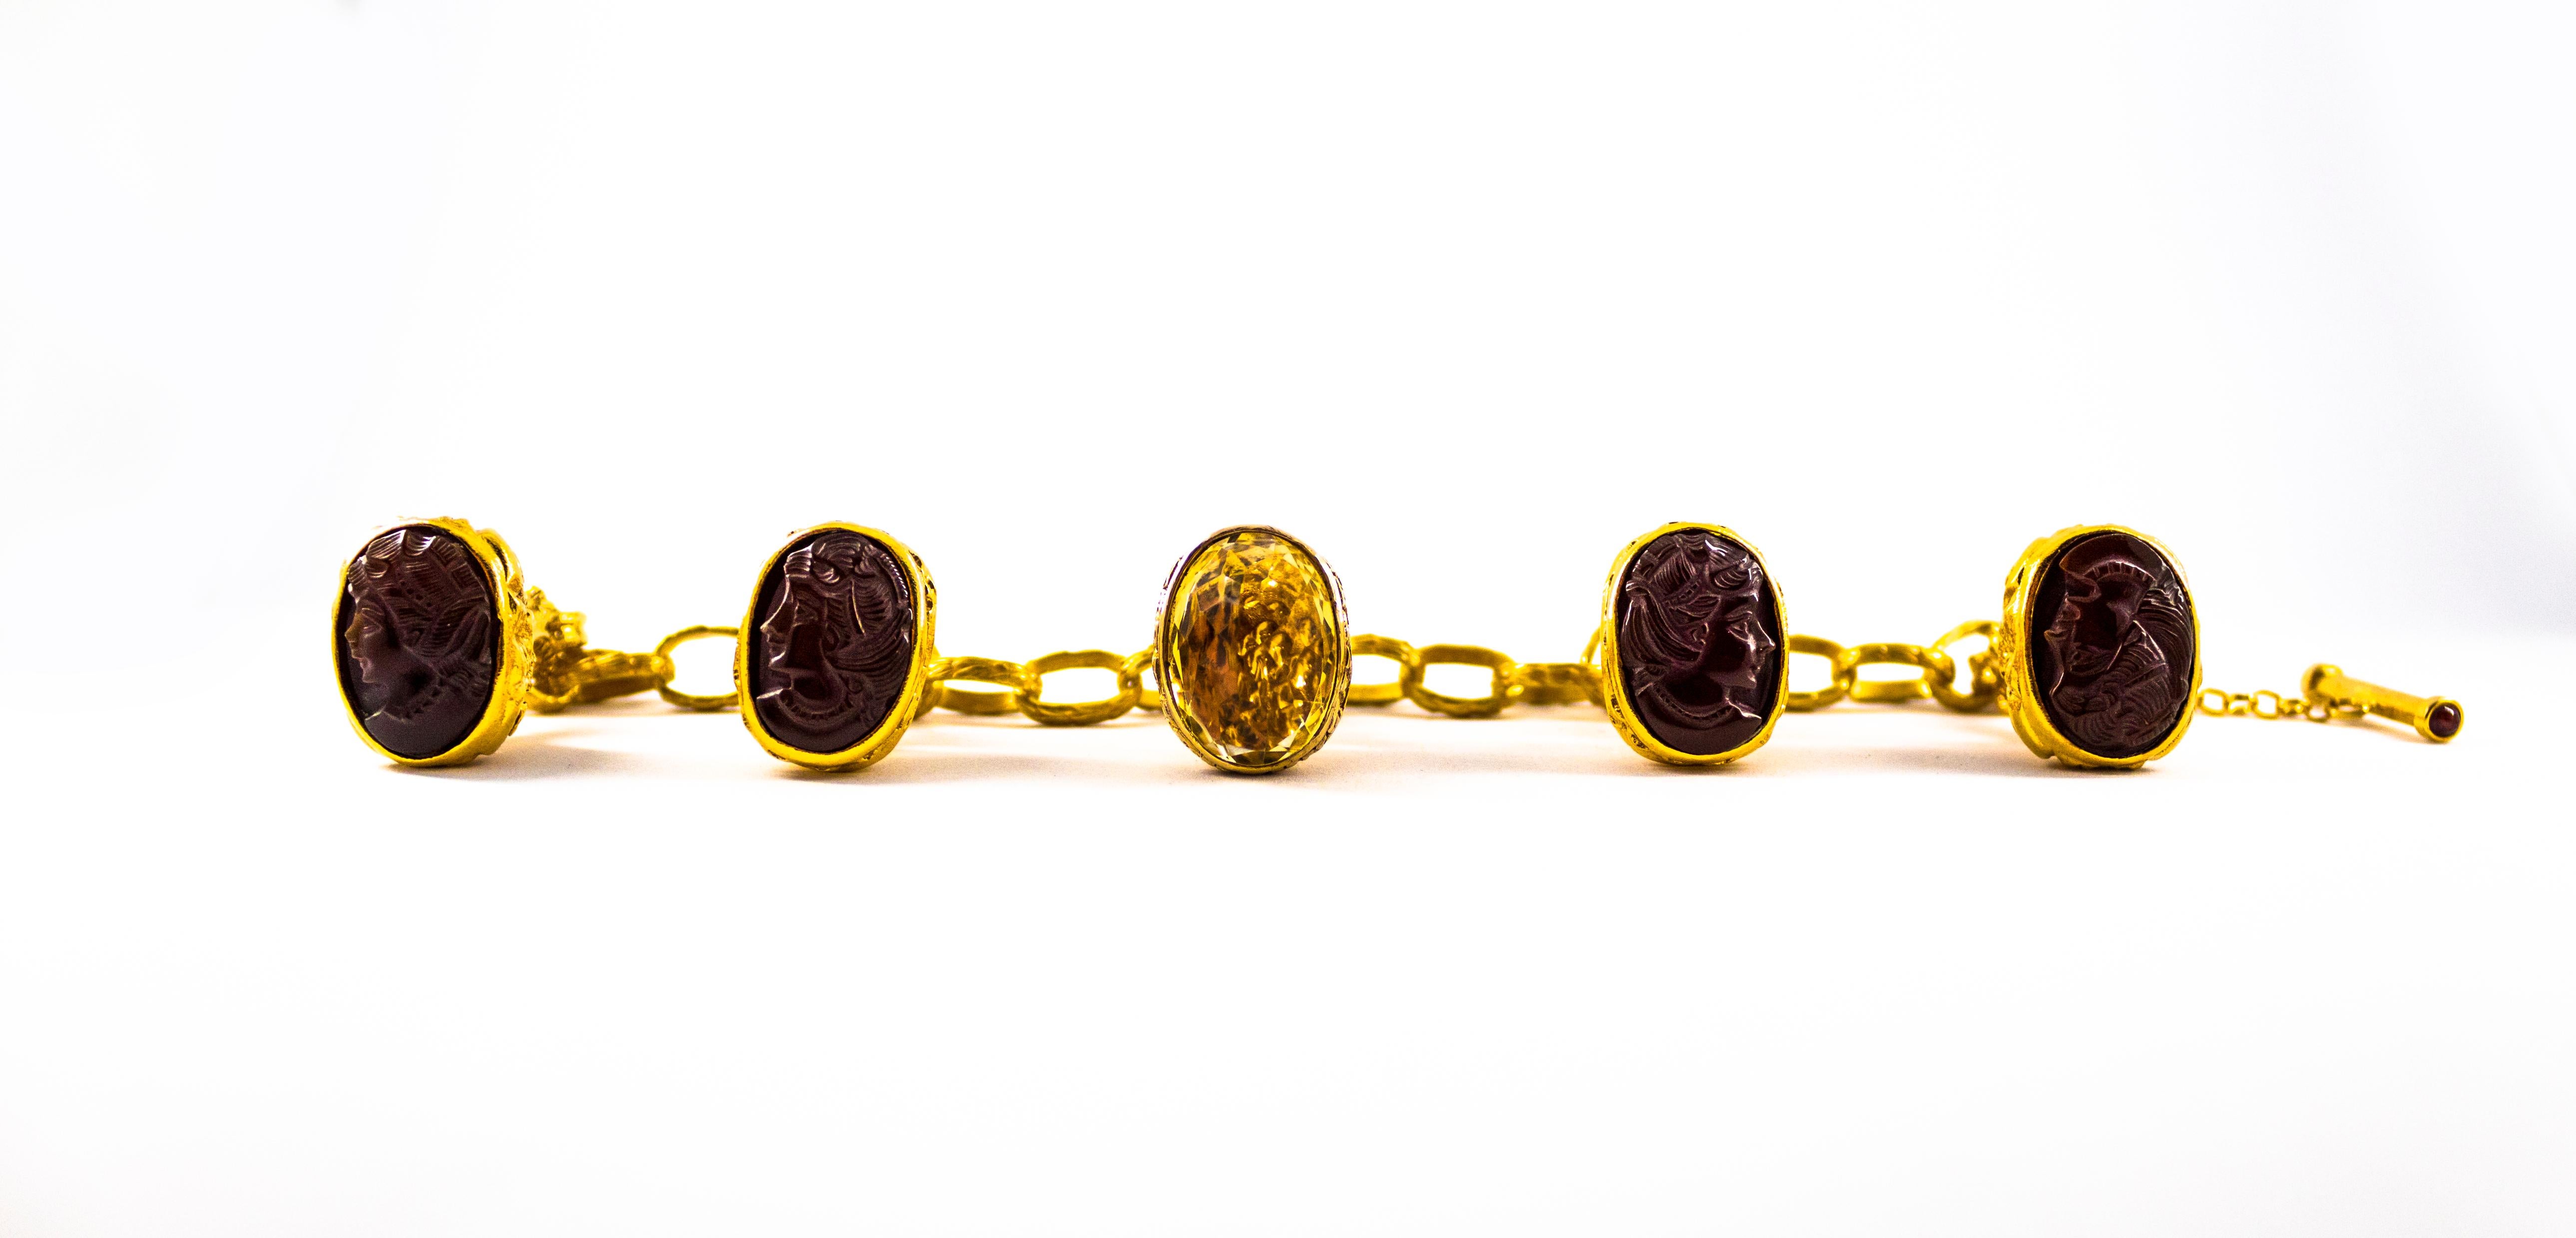 This Bracelet is made of 14K Yellow Gold with 9K Yellow Gold Charms.
This Bracelet has 0.24 Carats of Rubies.
This Bracelet has Carnelian.
This Bracelet has a 12.00 Carats Citrine.

We're a workshop so every piece is handmade, customizable and